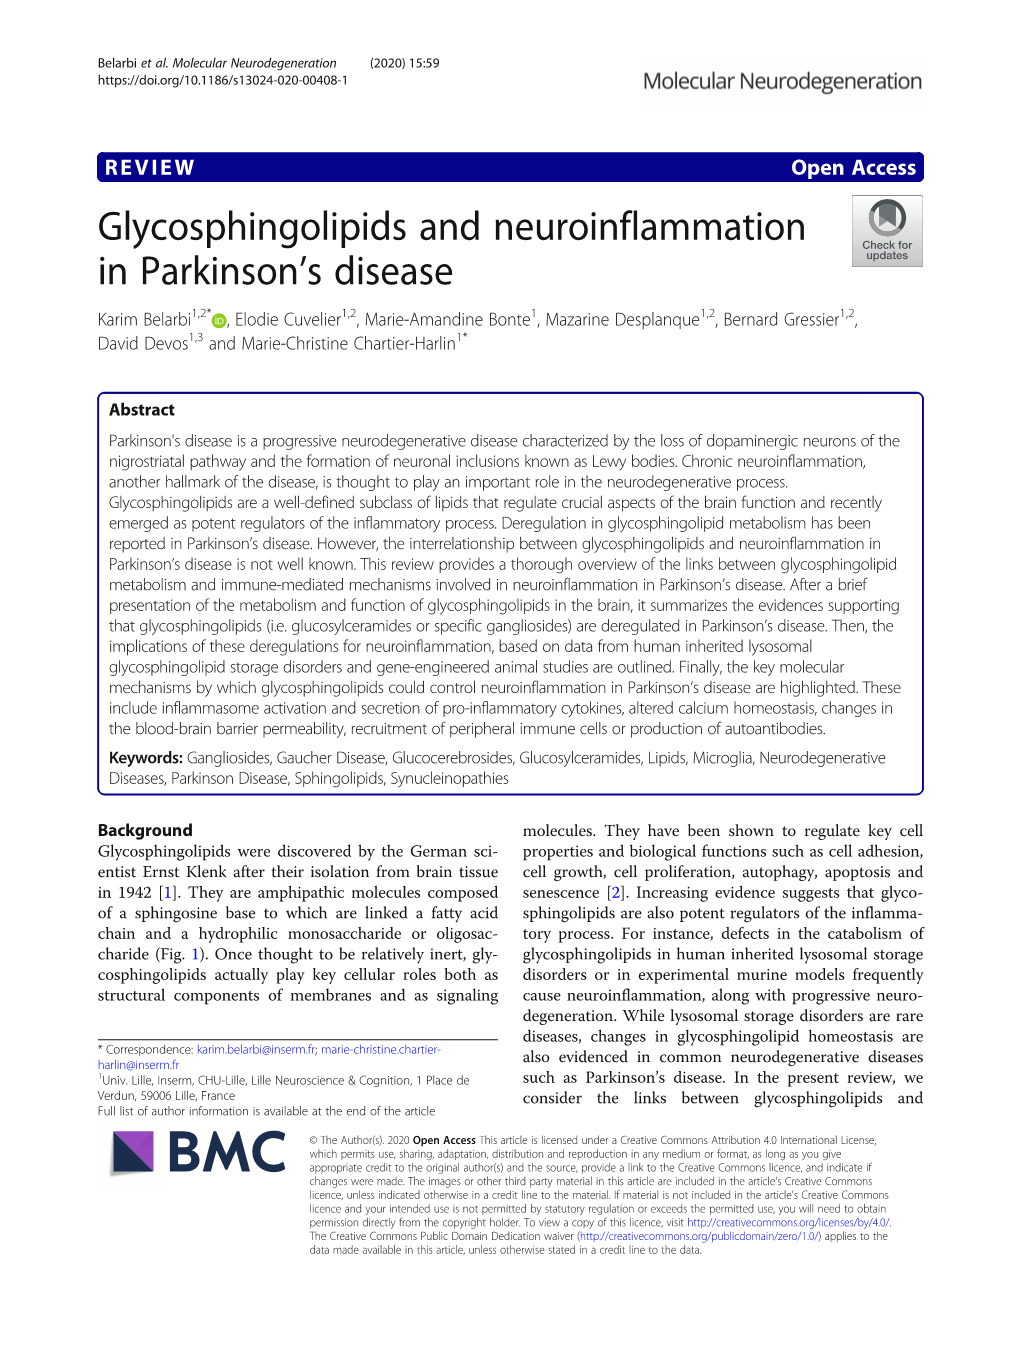 Glycosphingolipids and Neuroinflammation in Parkinson's